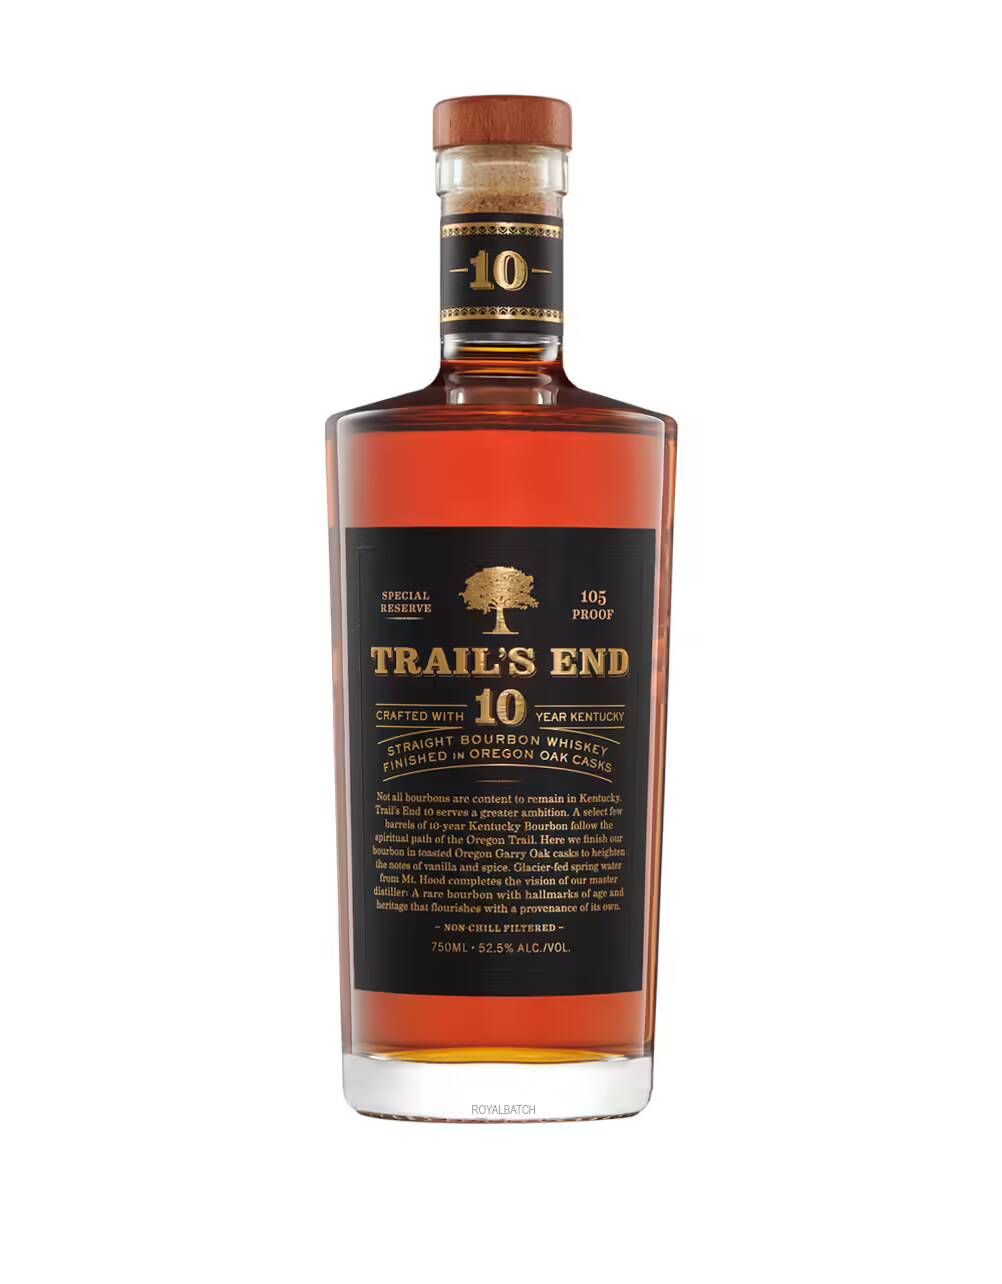 Trails End Special Reserve 10 year Old Kentucky Straight Bourbon Whiskey